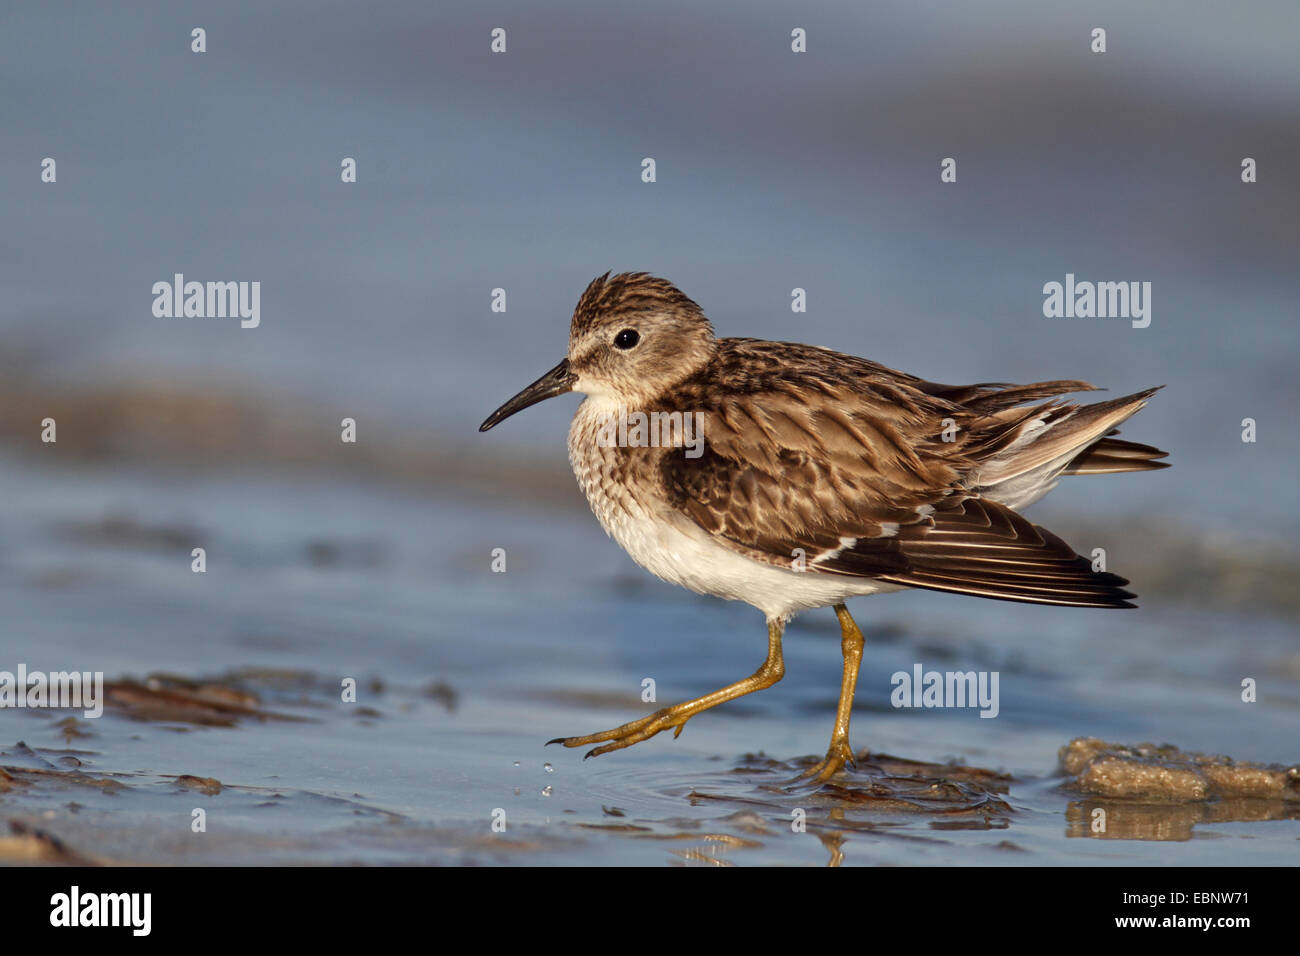 Least sandpiper (Calidris minutilla), going in shallow water at the shore, USA, Florida Stock Photo